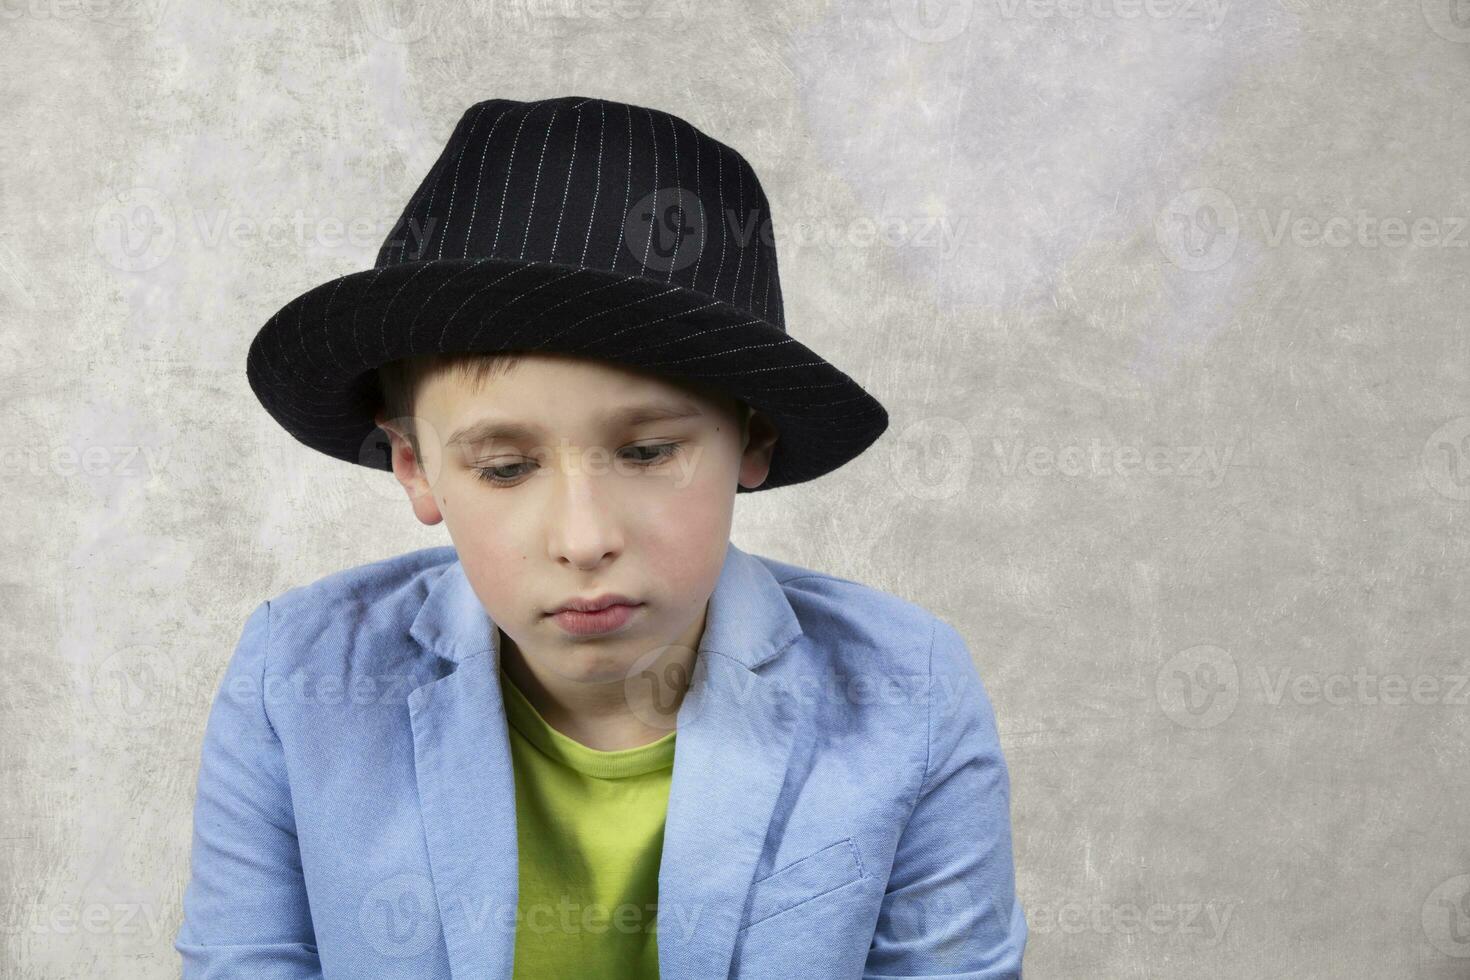 Sad boy in a suit and black hat. photo